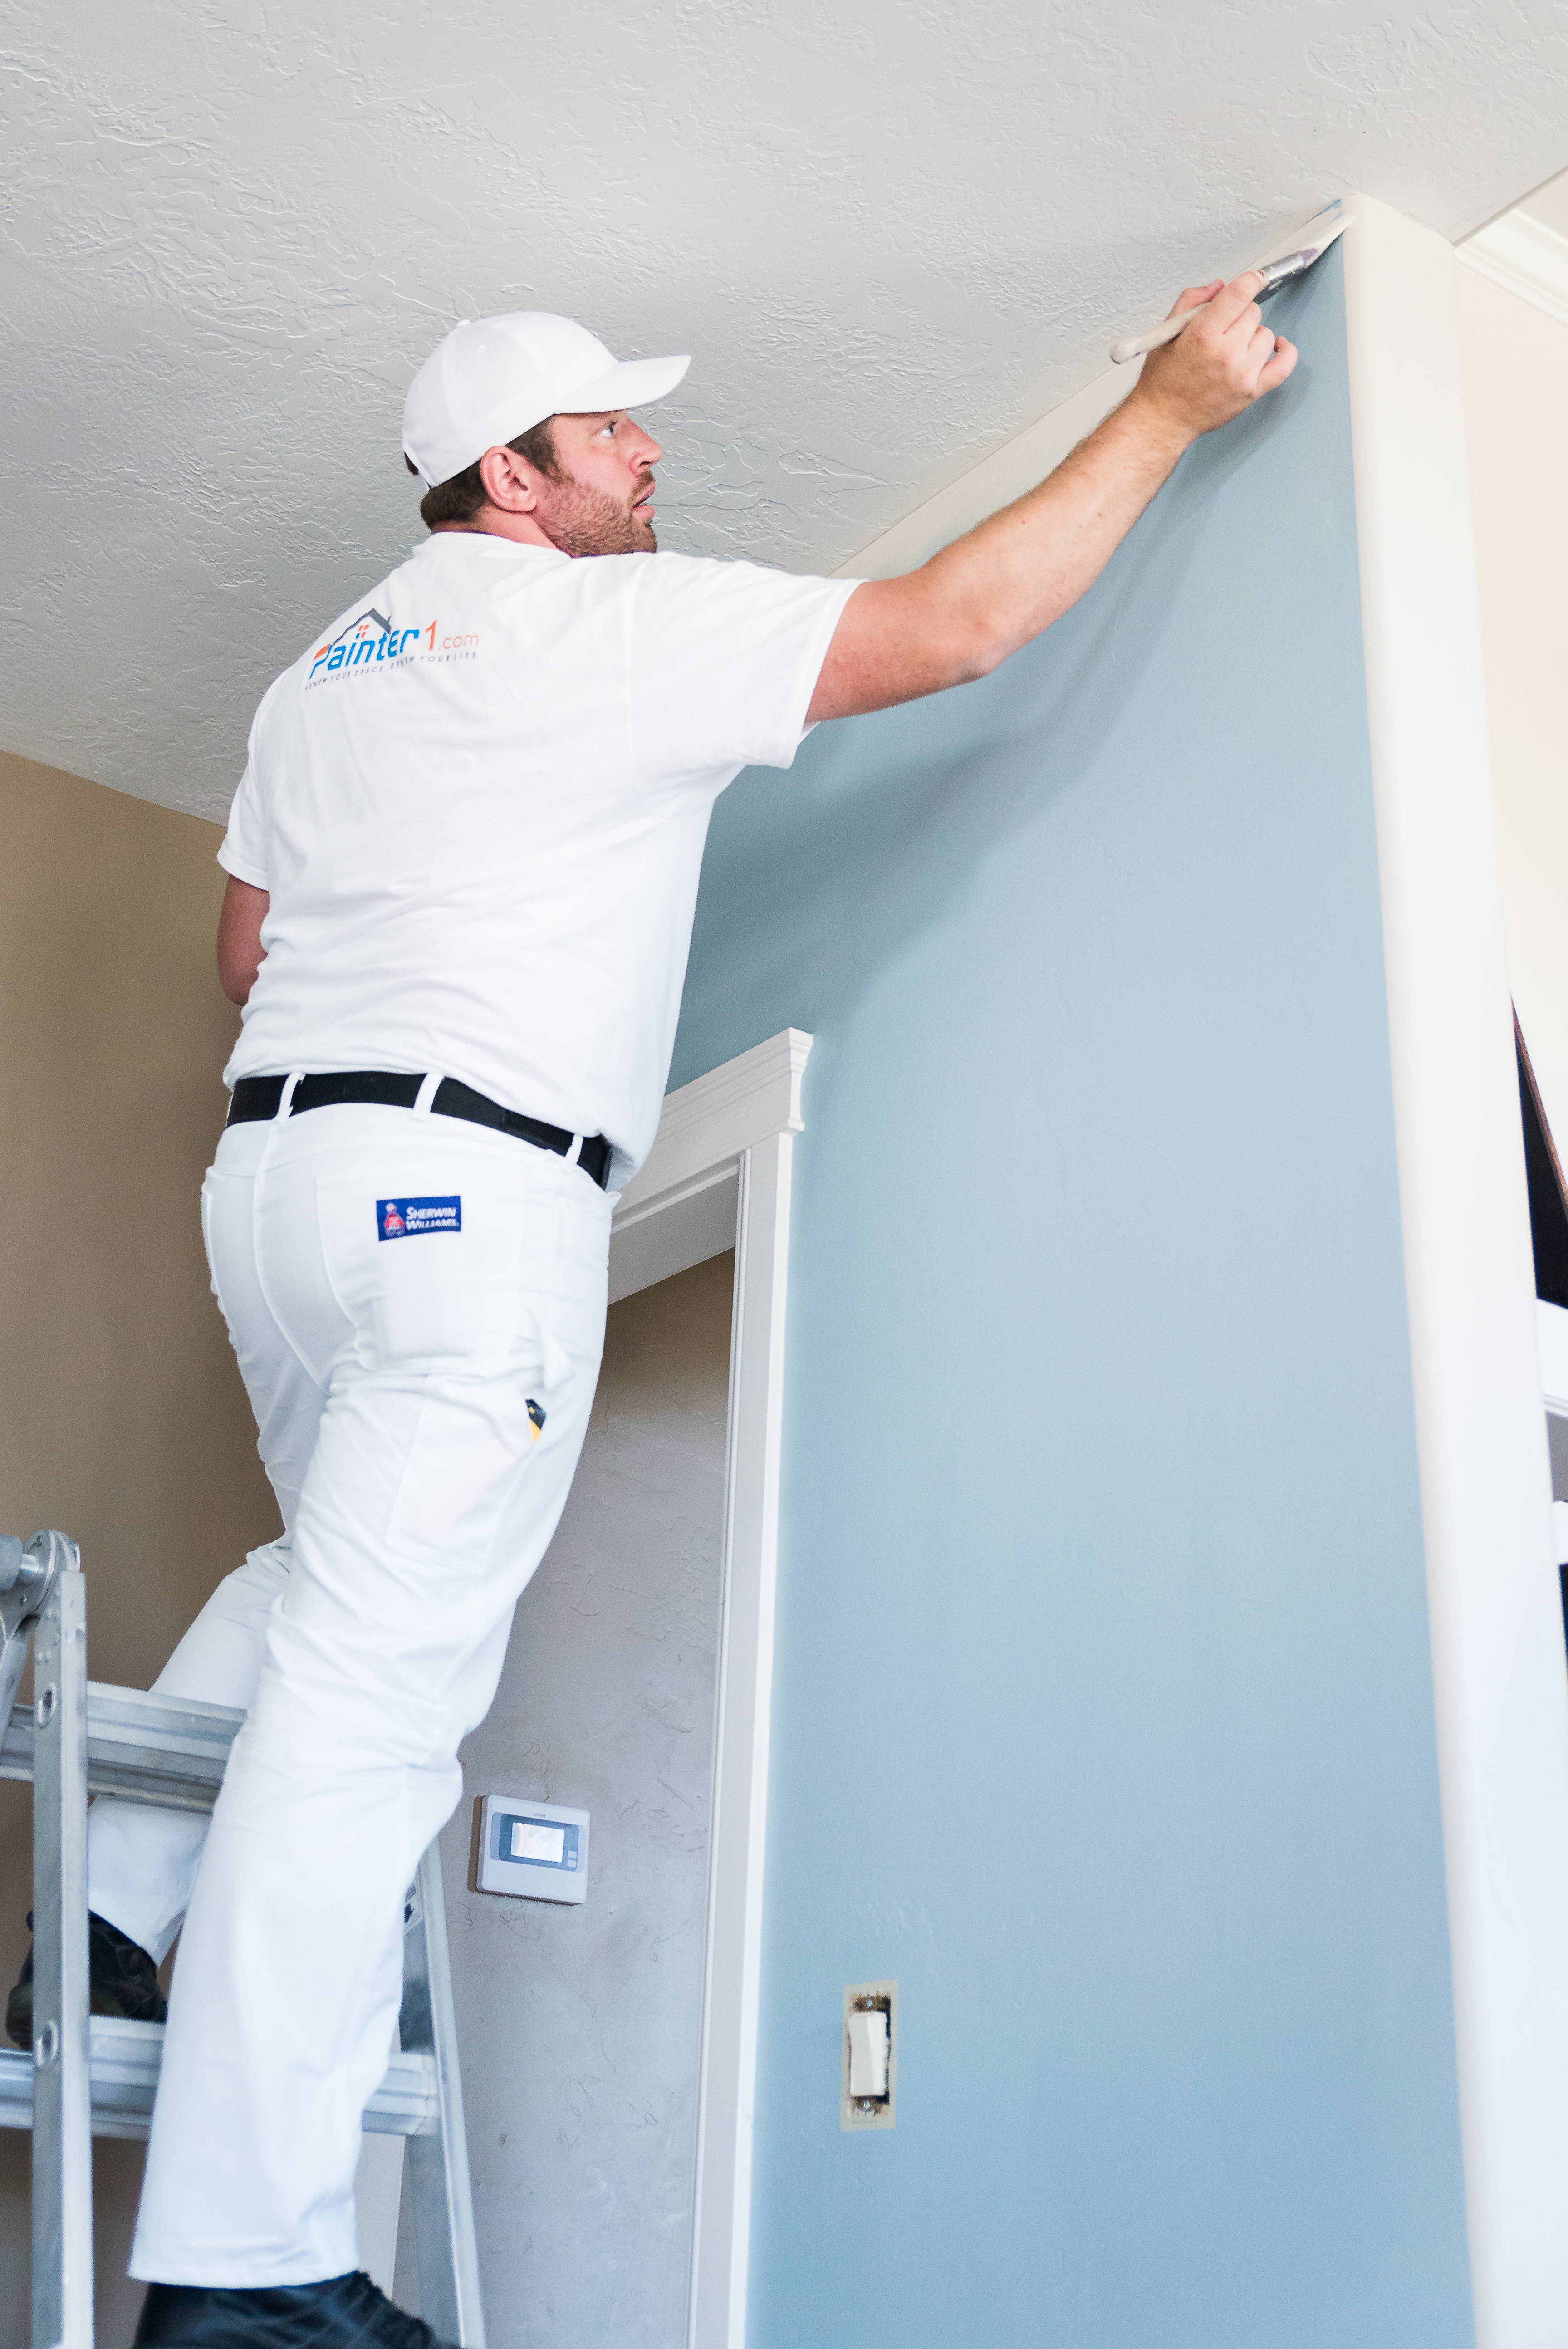 Painter1 - Best wallpaper removal services near you.